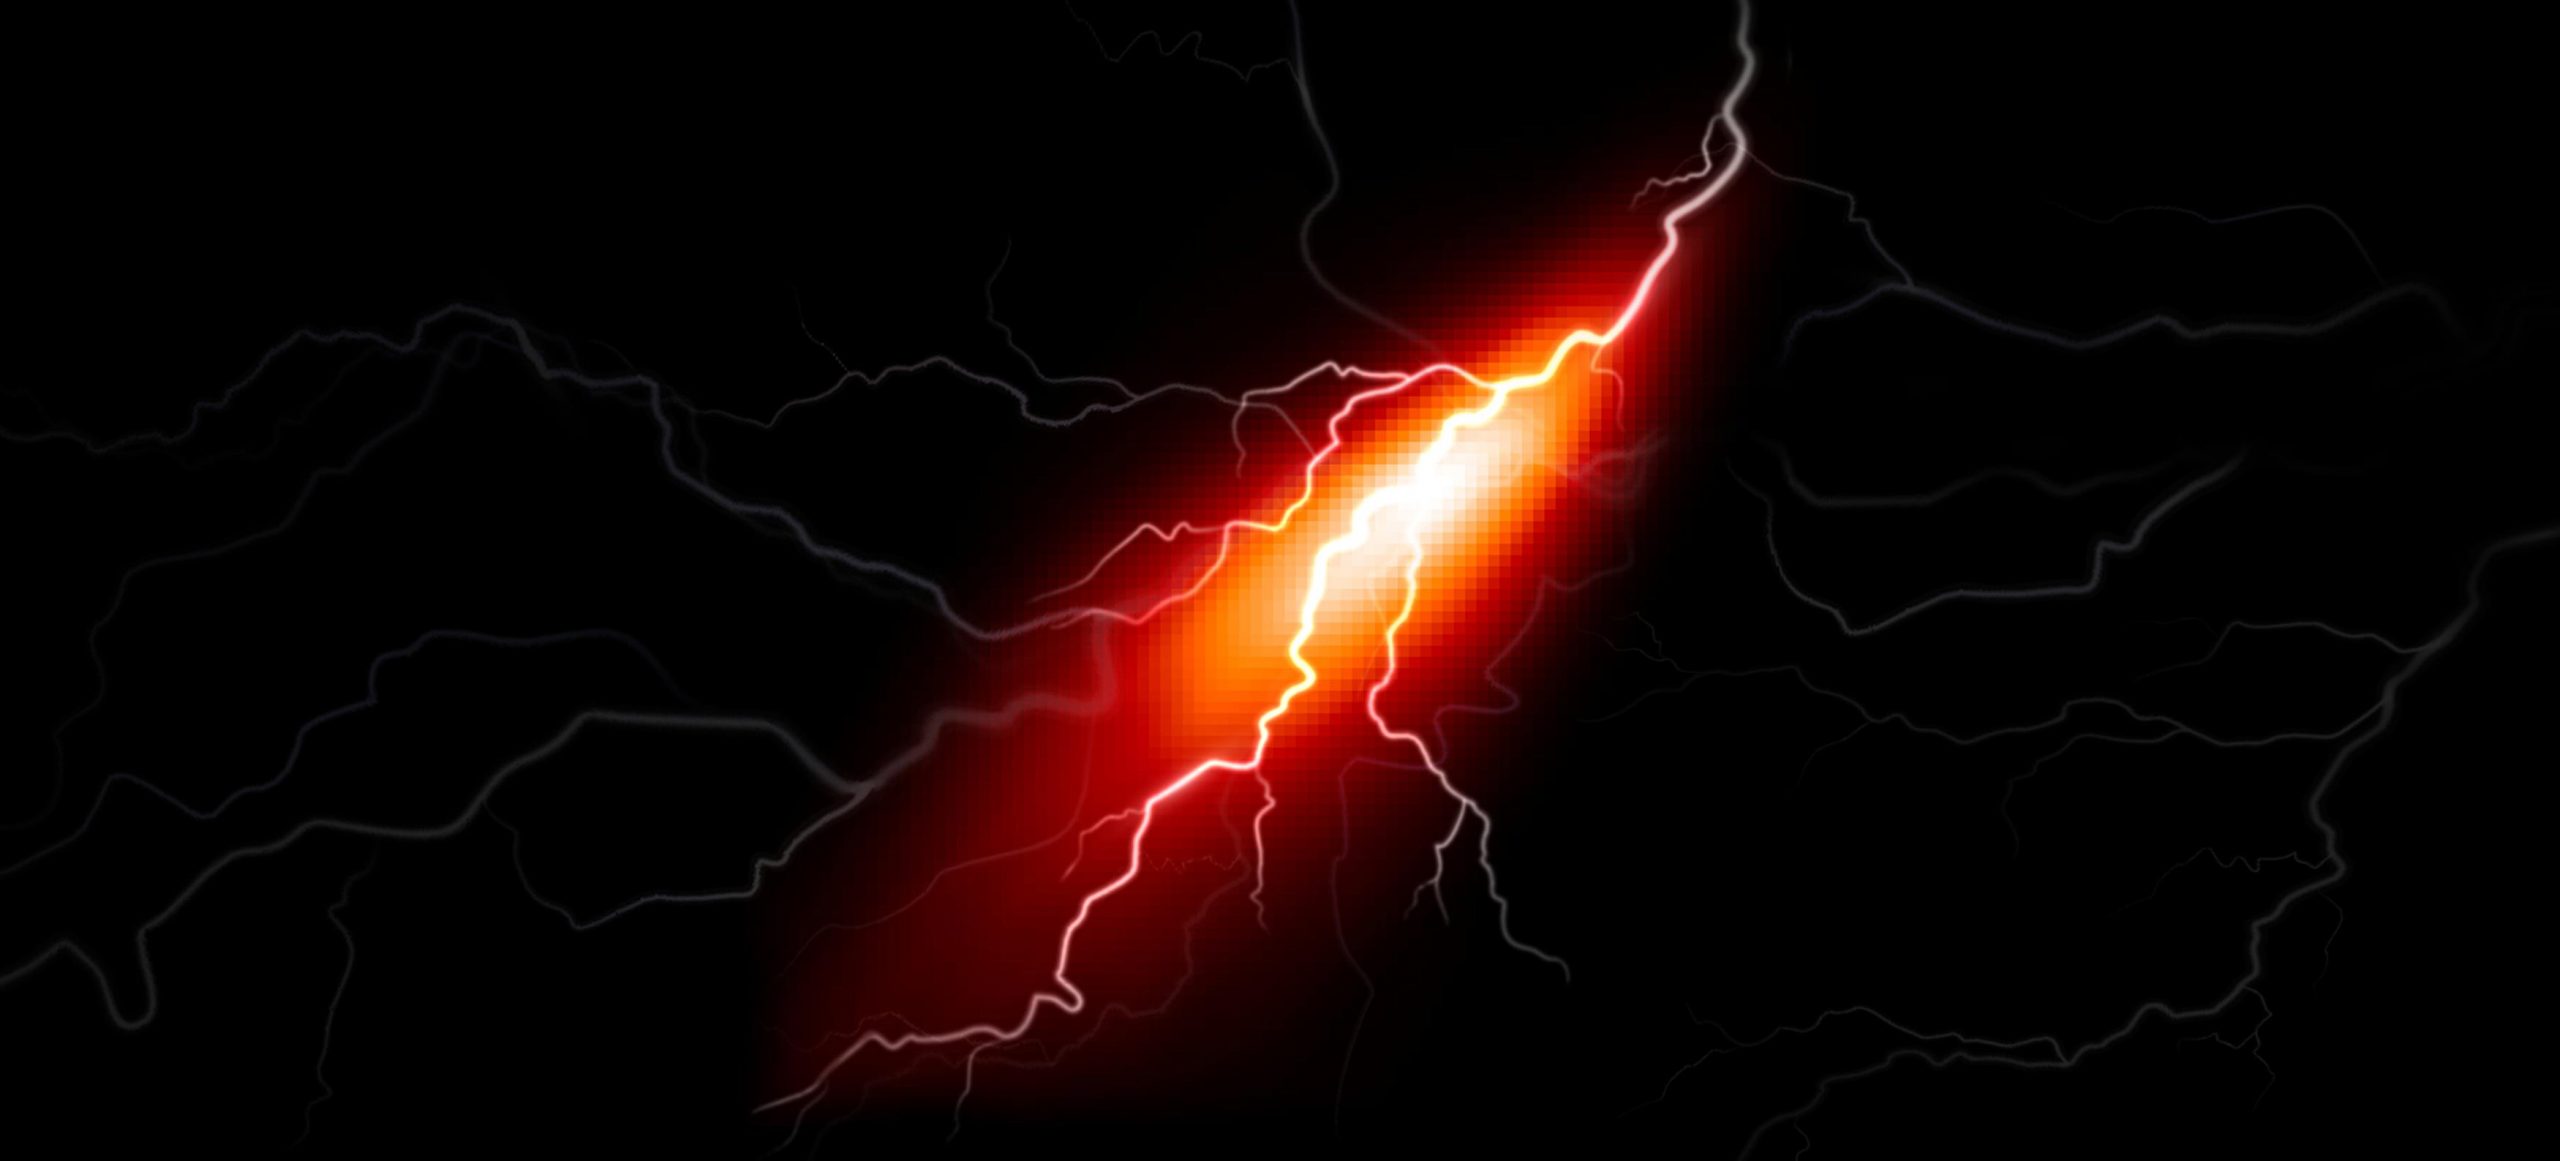 Solving complex physics problems at lightning speed – 20 years of calculations in 1 hour